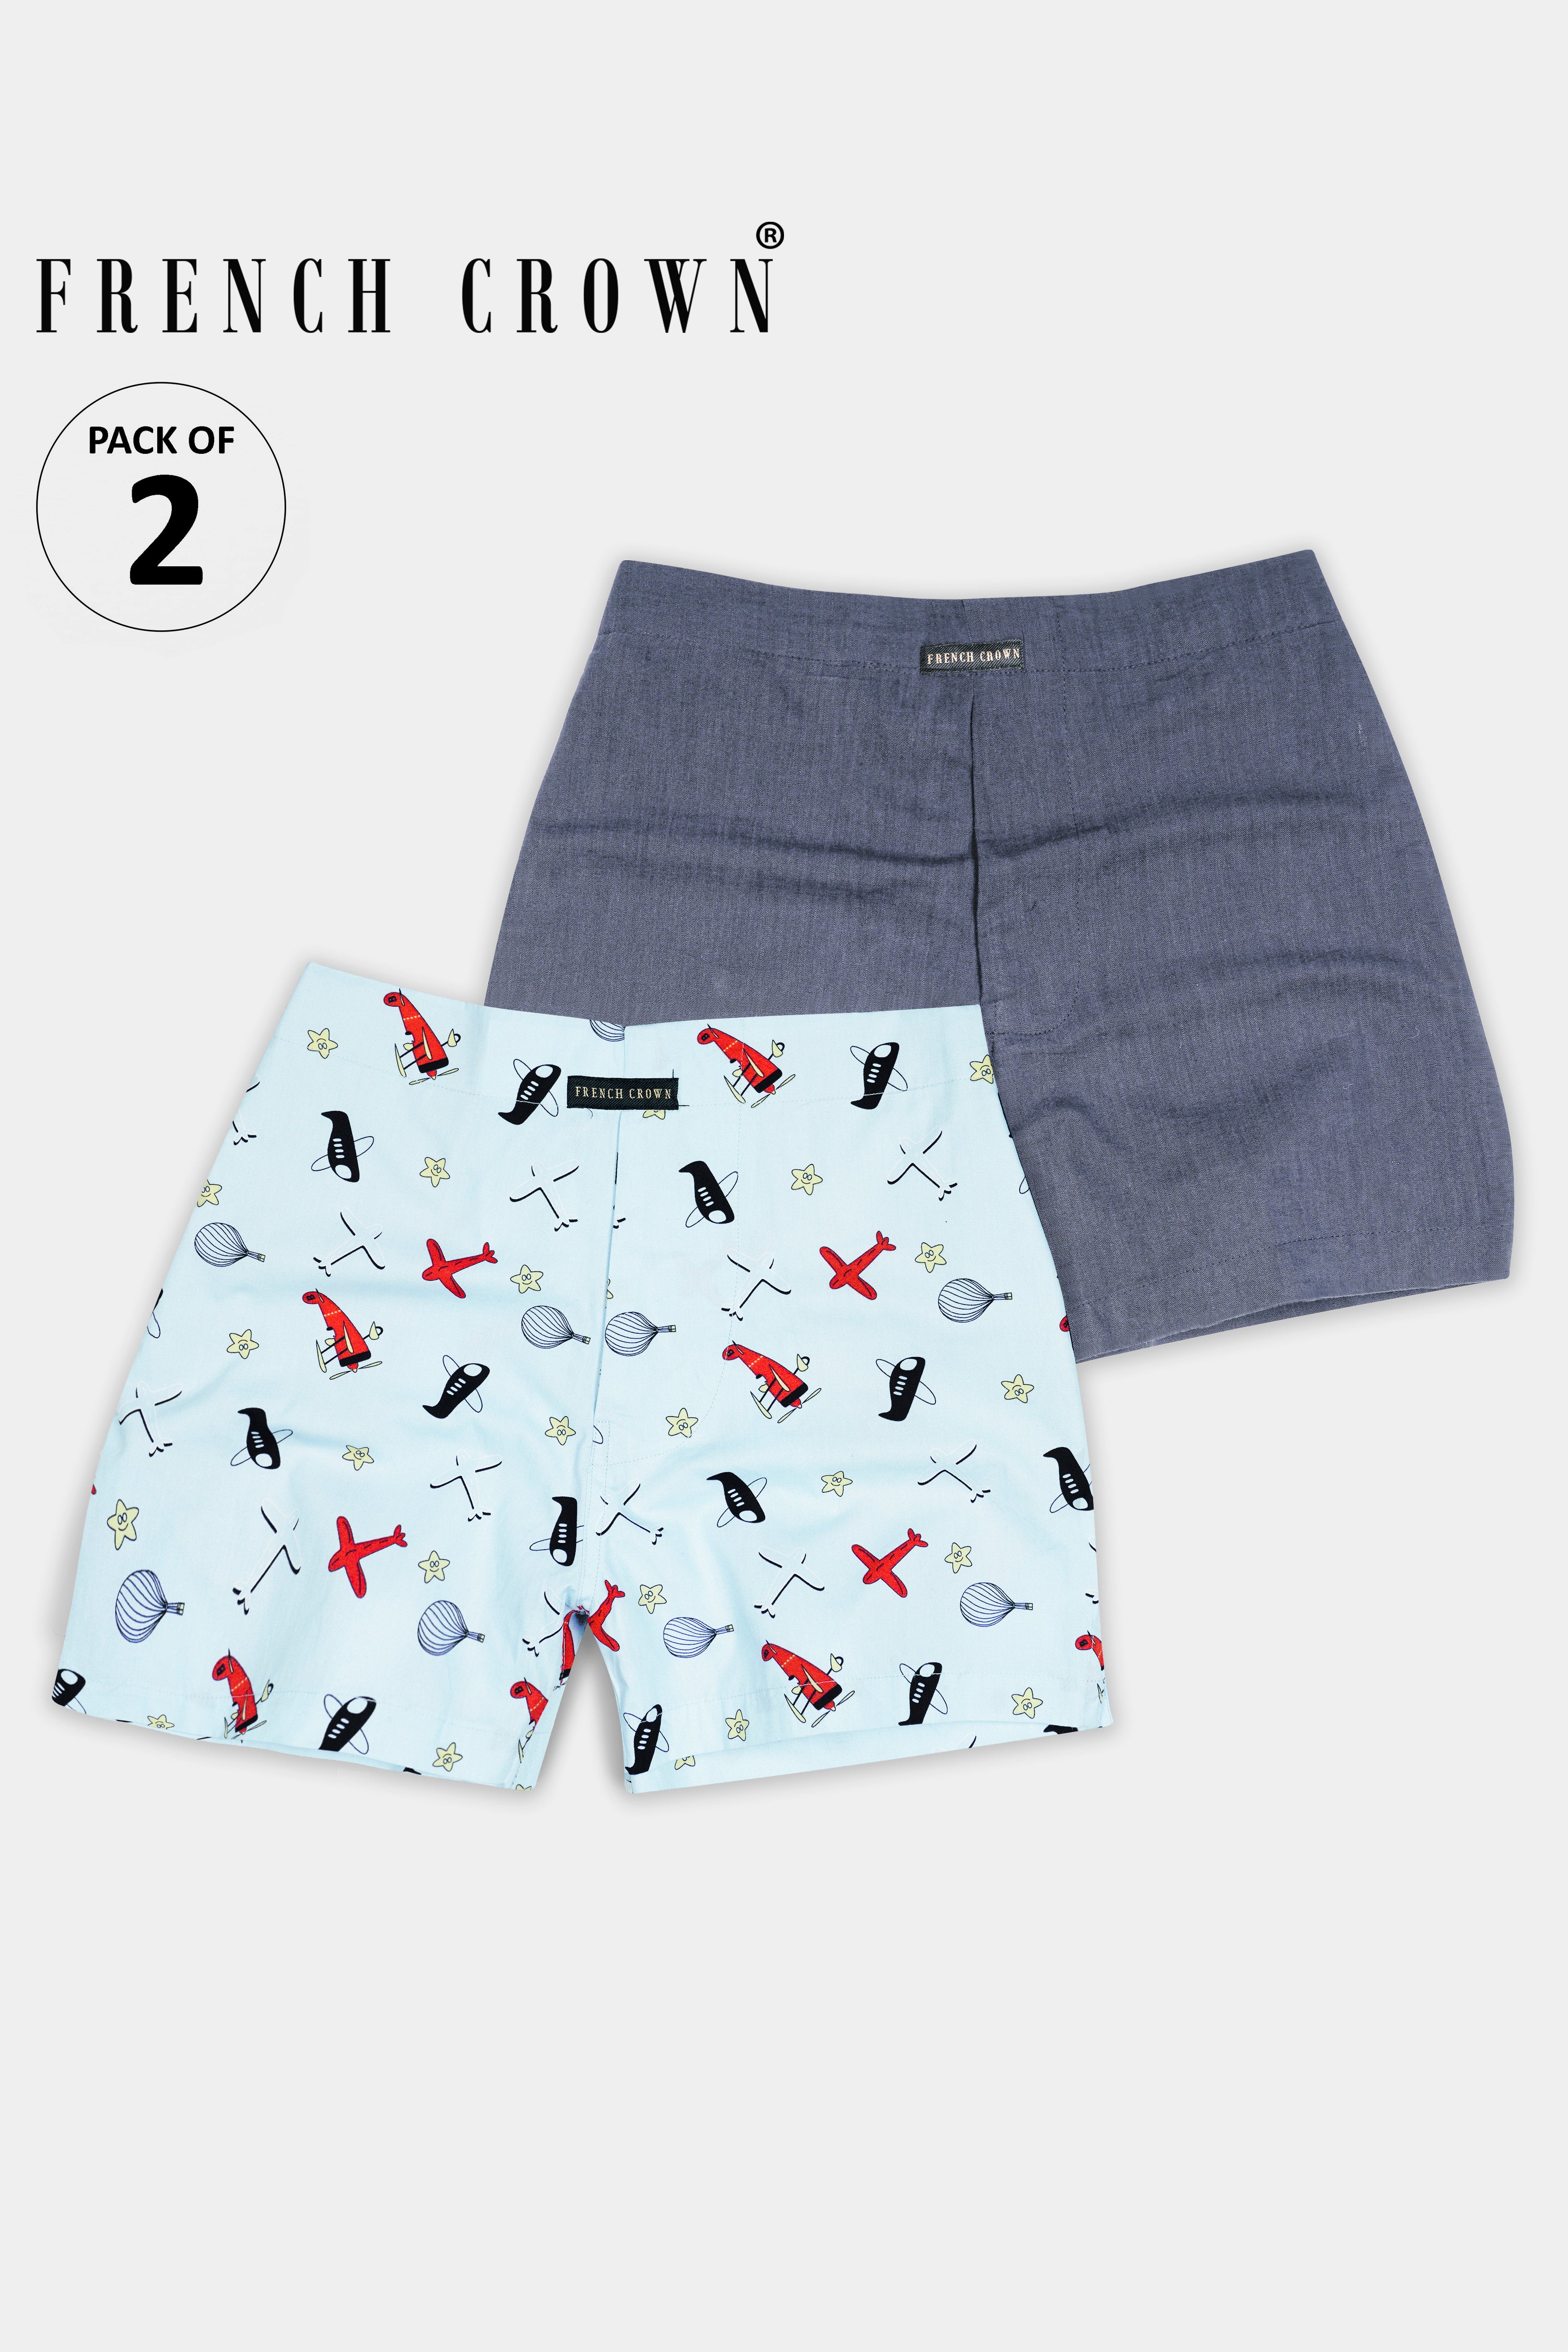 River Bed Gray Denim and Geyser Blue With Mandy Red Airplane Printed Premium Cotton Boxers BX555-BX553-28, BX555-BX553-30, BX555-BX553-32, BX555-BX553-34, BX555-BX553-36, BX555-BX553-38, BX555-BX553-40, BX555-BX553-42, BX555-BX553-44